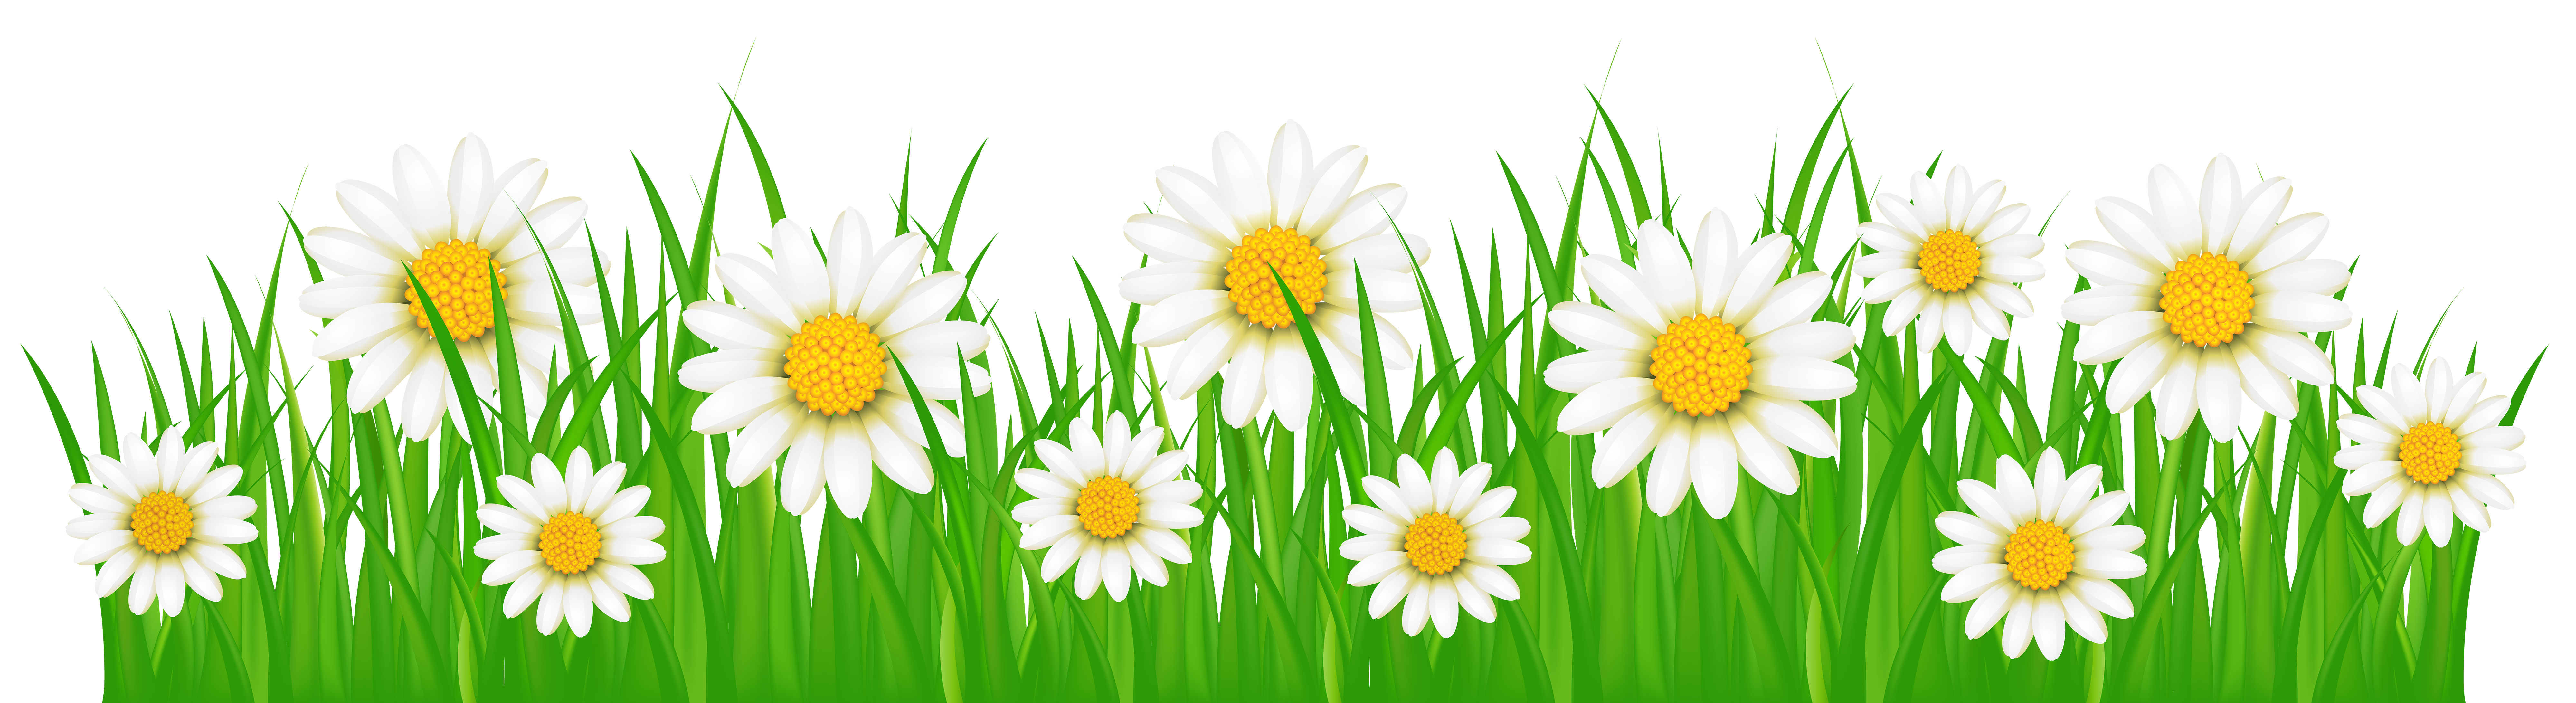 Grass_Ground_with_White_Flowers_PNG_Clip_Art_Image.png